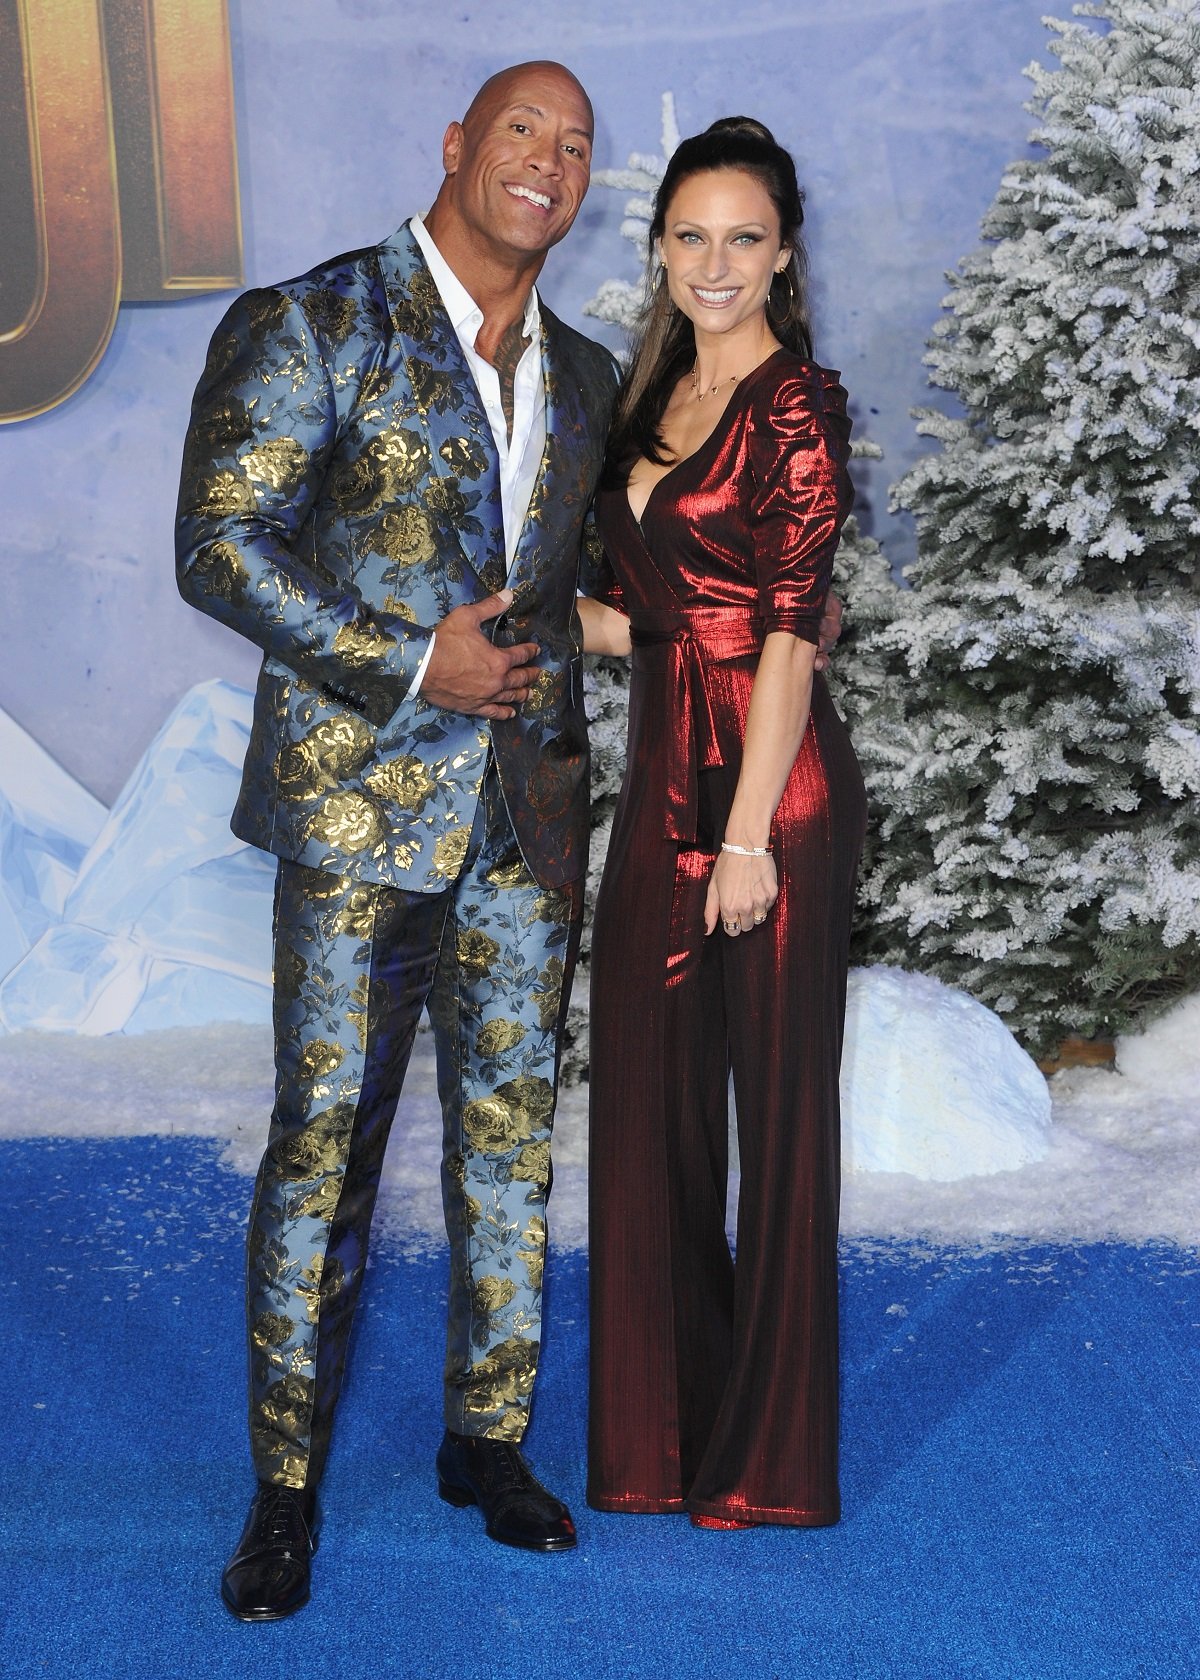 Dwayne Johnson and Lauren Hashian on December 9, 2019, in Hollywood, California. | Source: Getty Images 